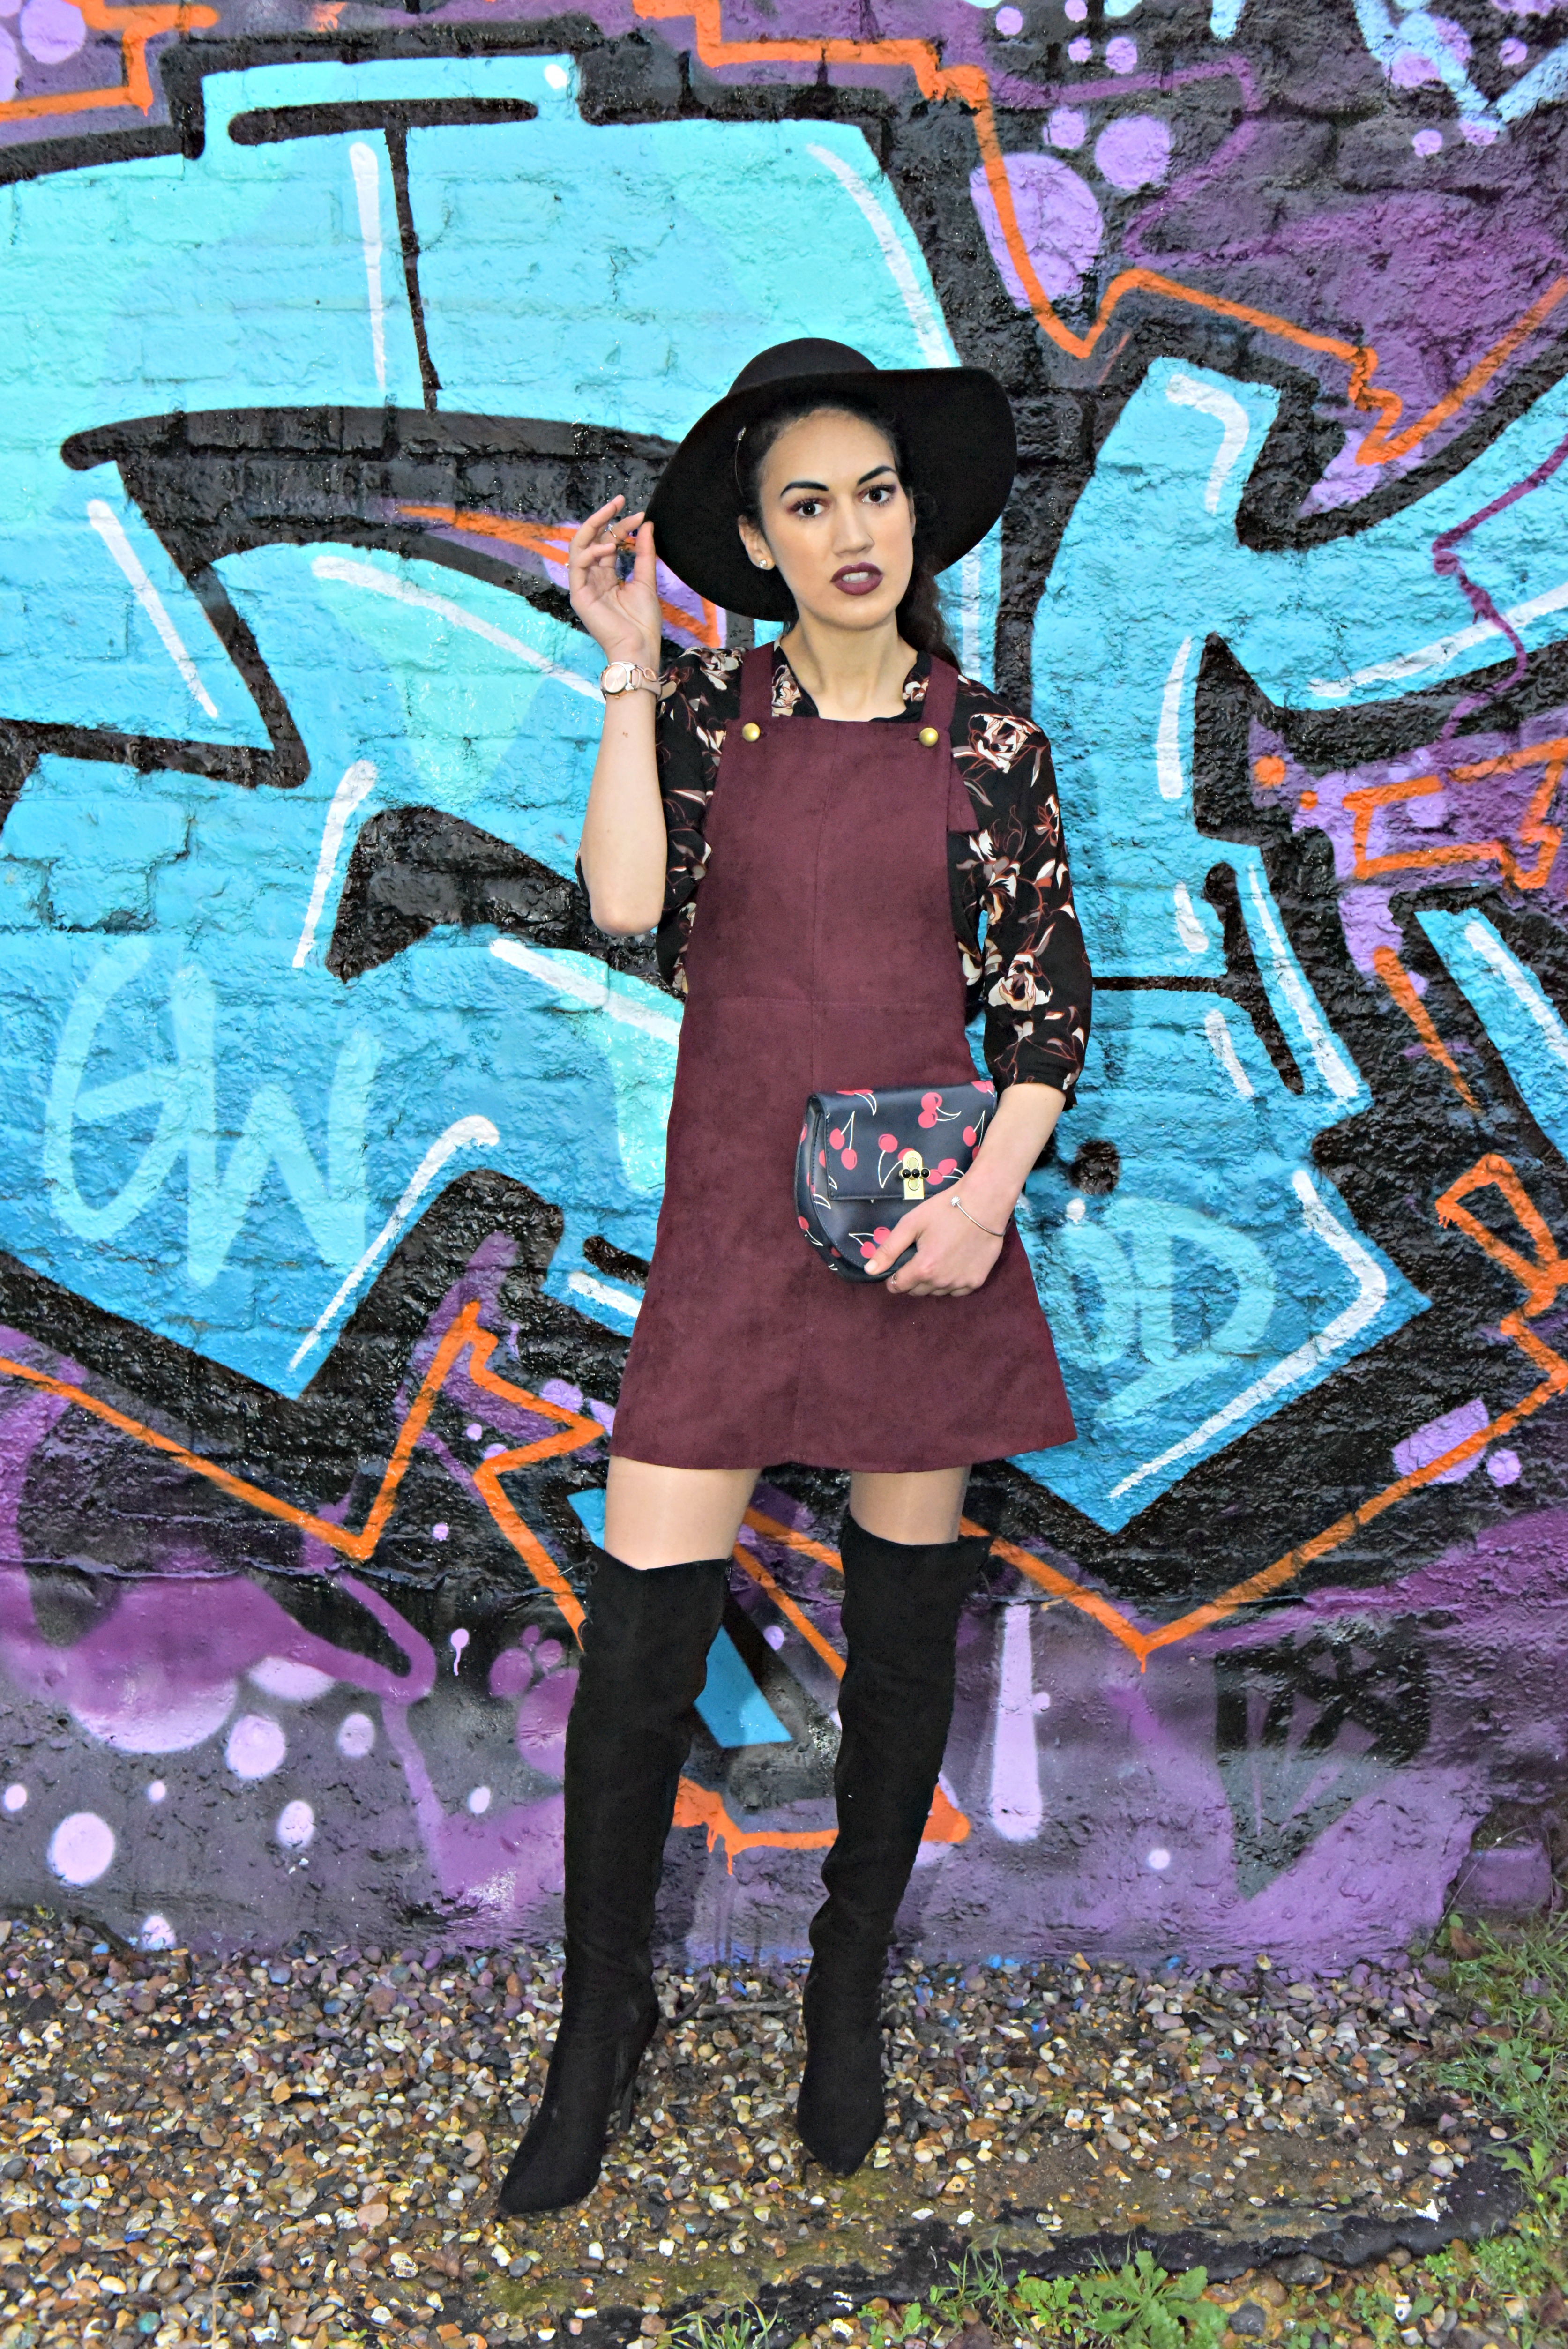 <img src="ana.jpg" alt="ana 70s pinafore with vintage fashion accessories"/> 